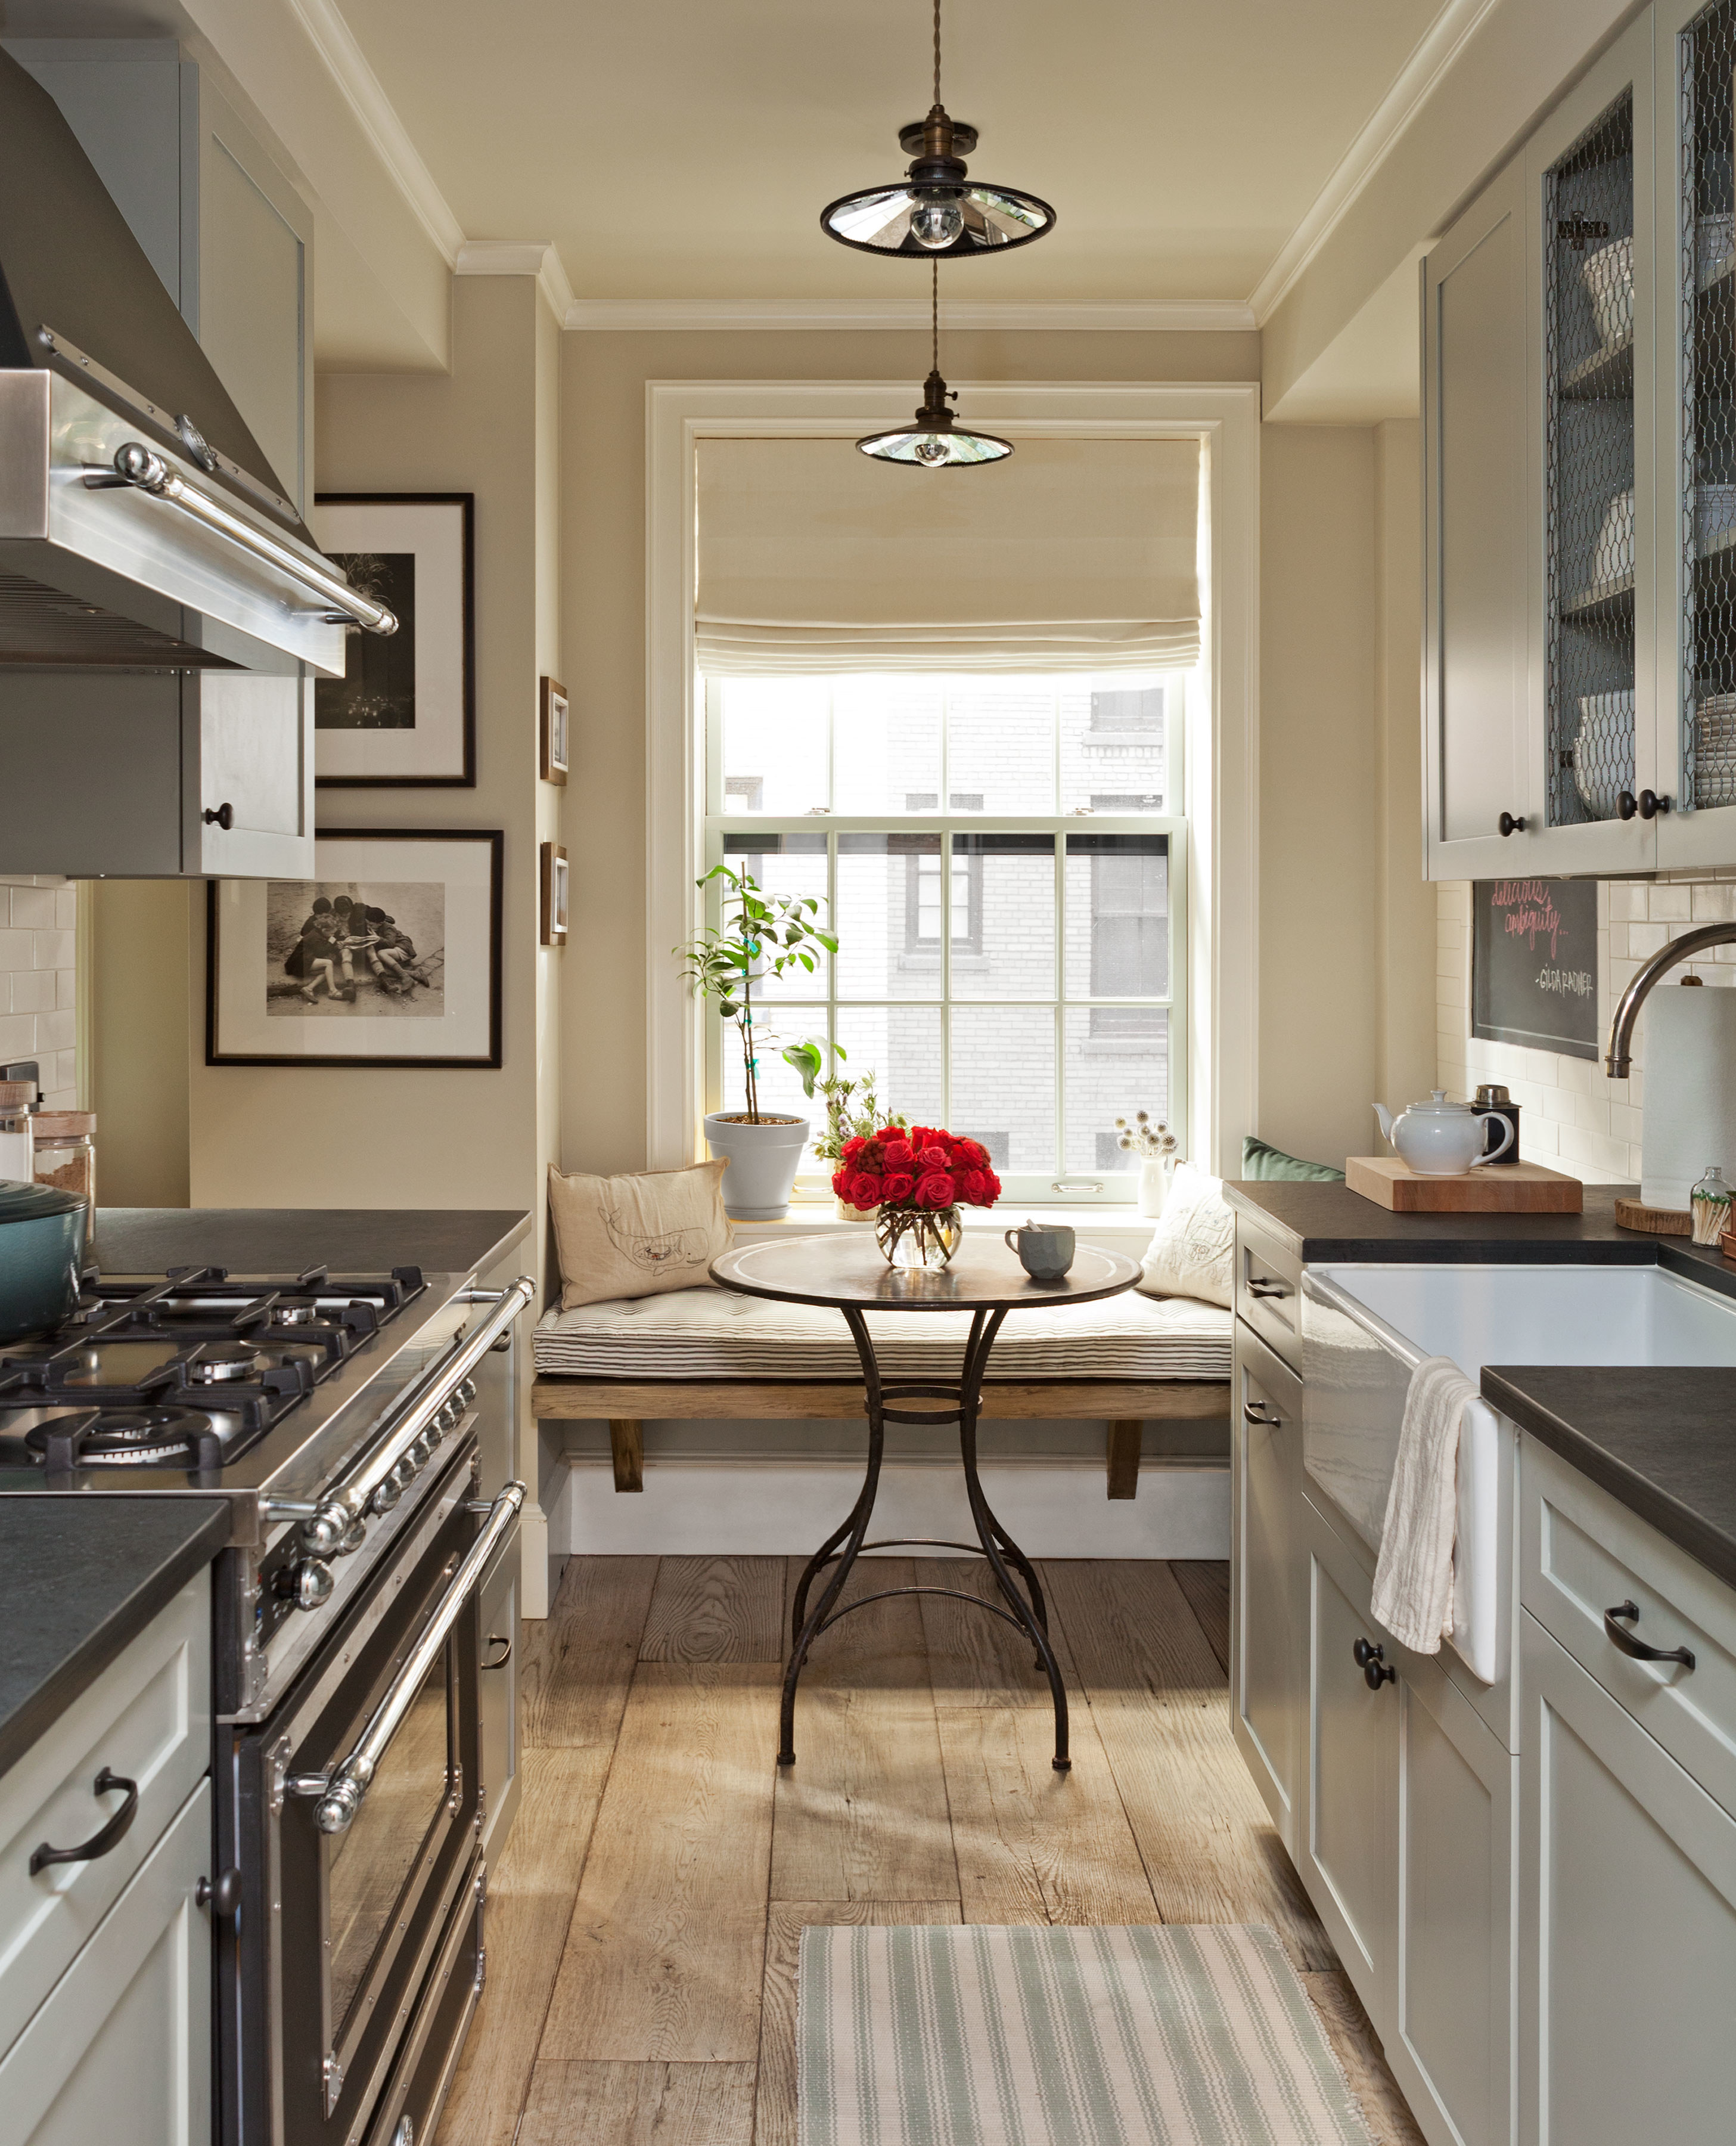 5 Tips to Make Your Small Kitchen Feel Large | HuffPost